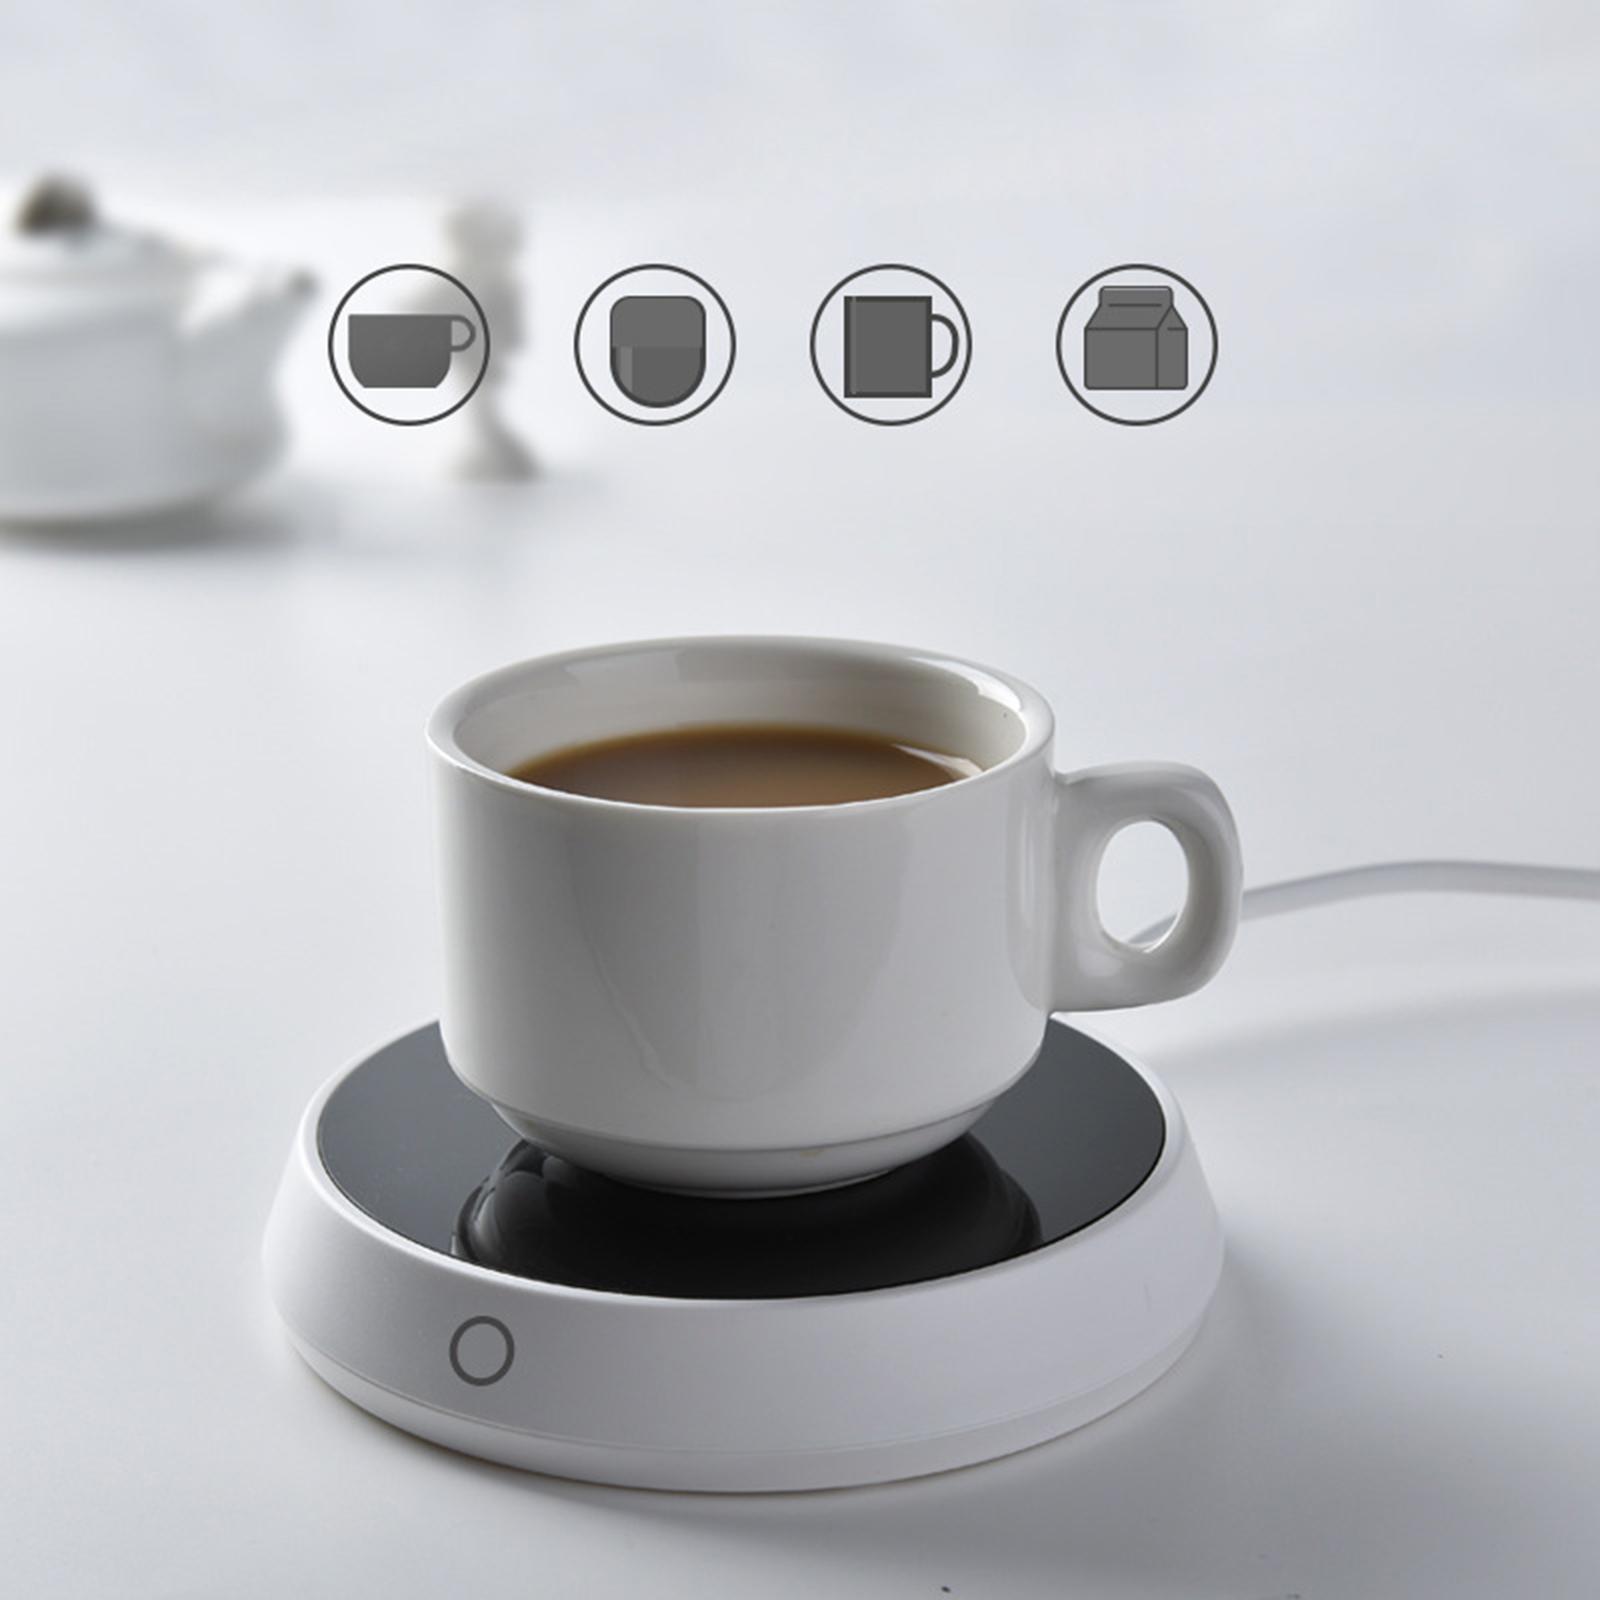 USB Electric Heating Cup mat Cup Heater Thermostat Coasters for Tea